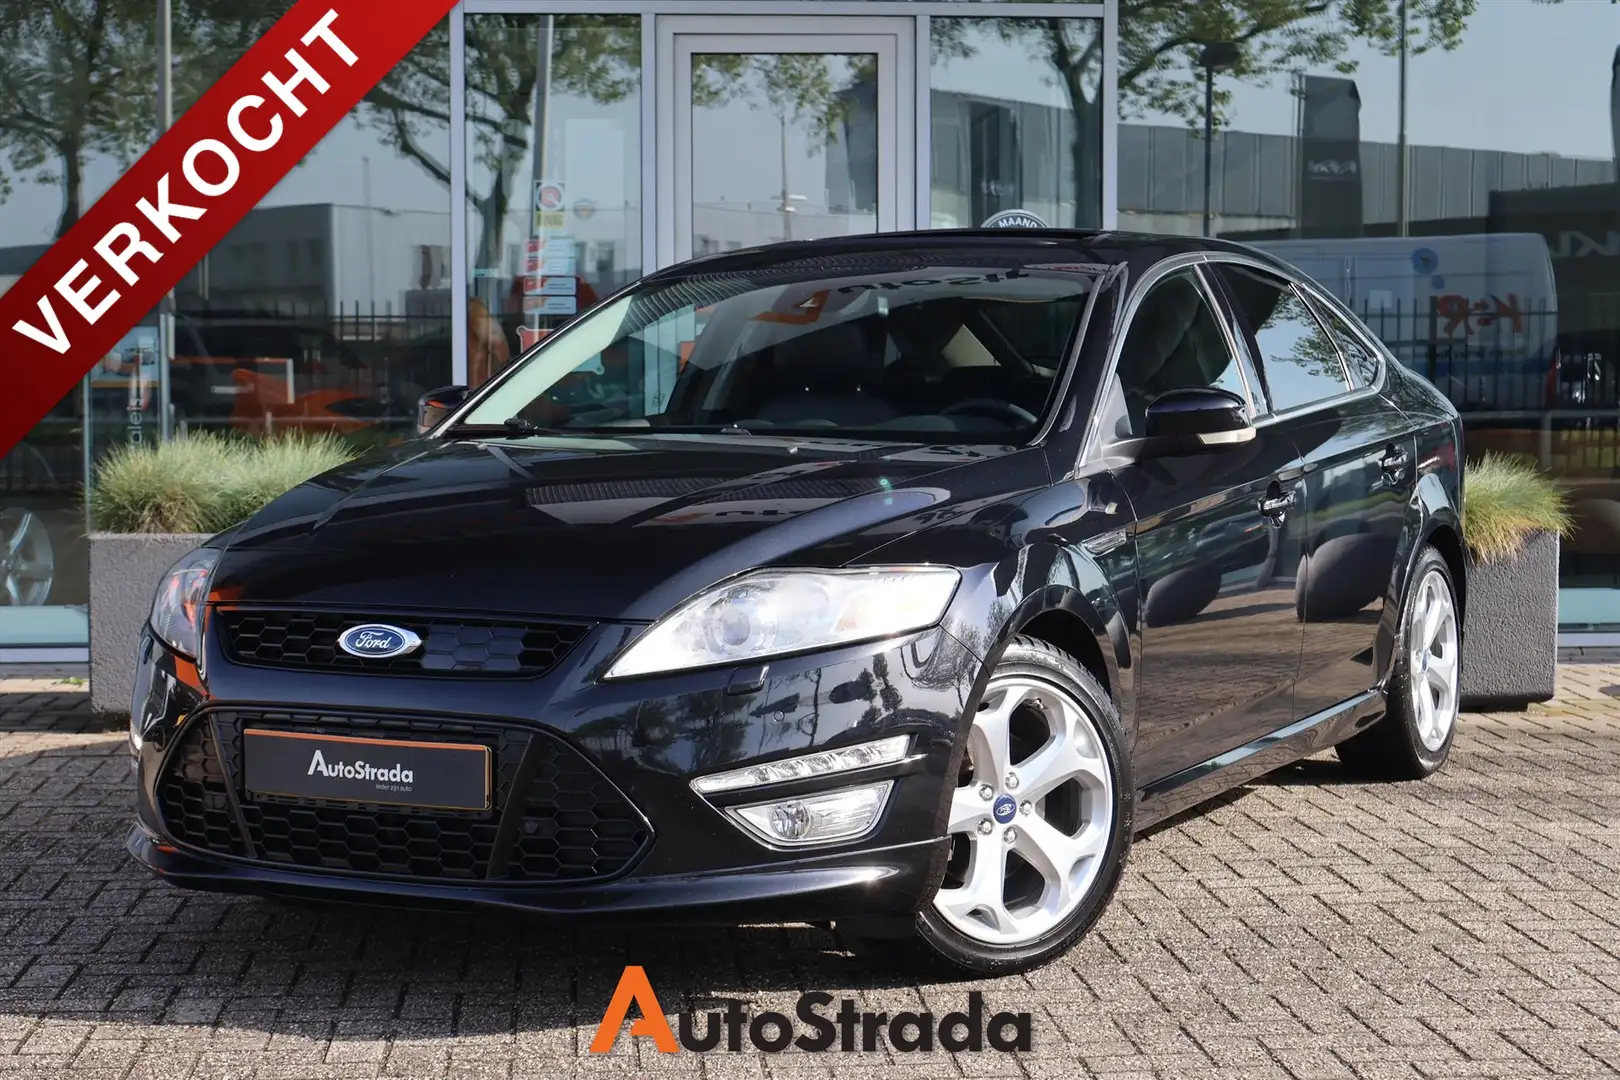 Ford Mondeo 2.0 S-EDITION PS6 5D 239PK | Pano | Memory stoelen crna - 1